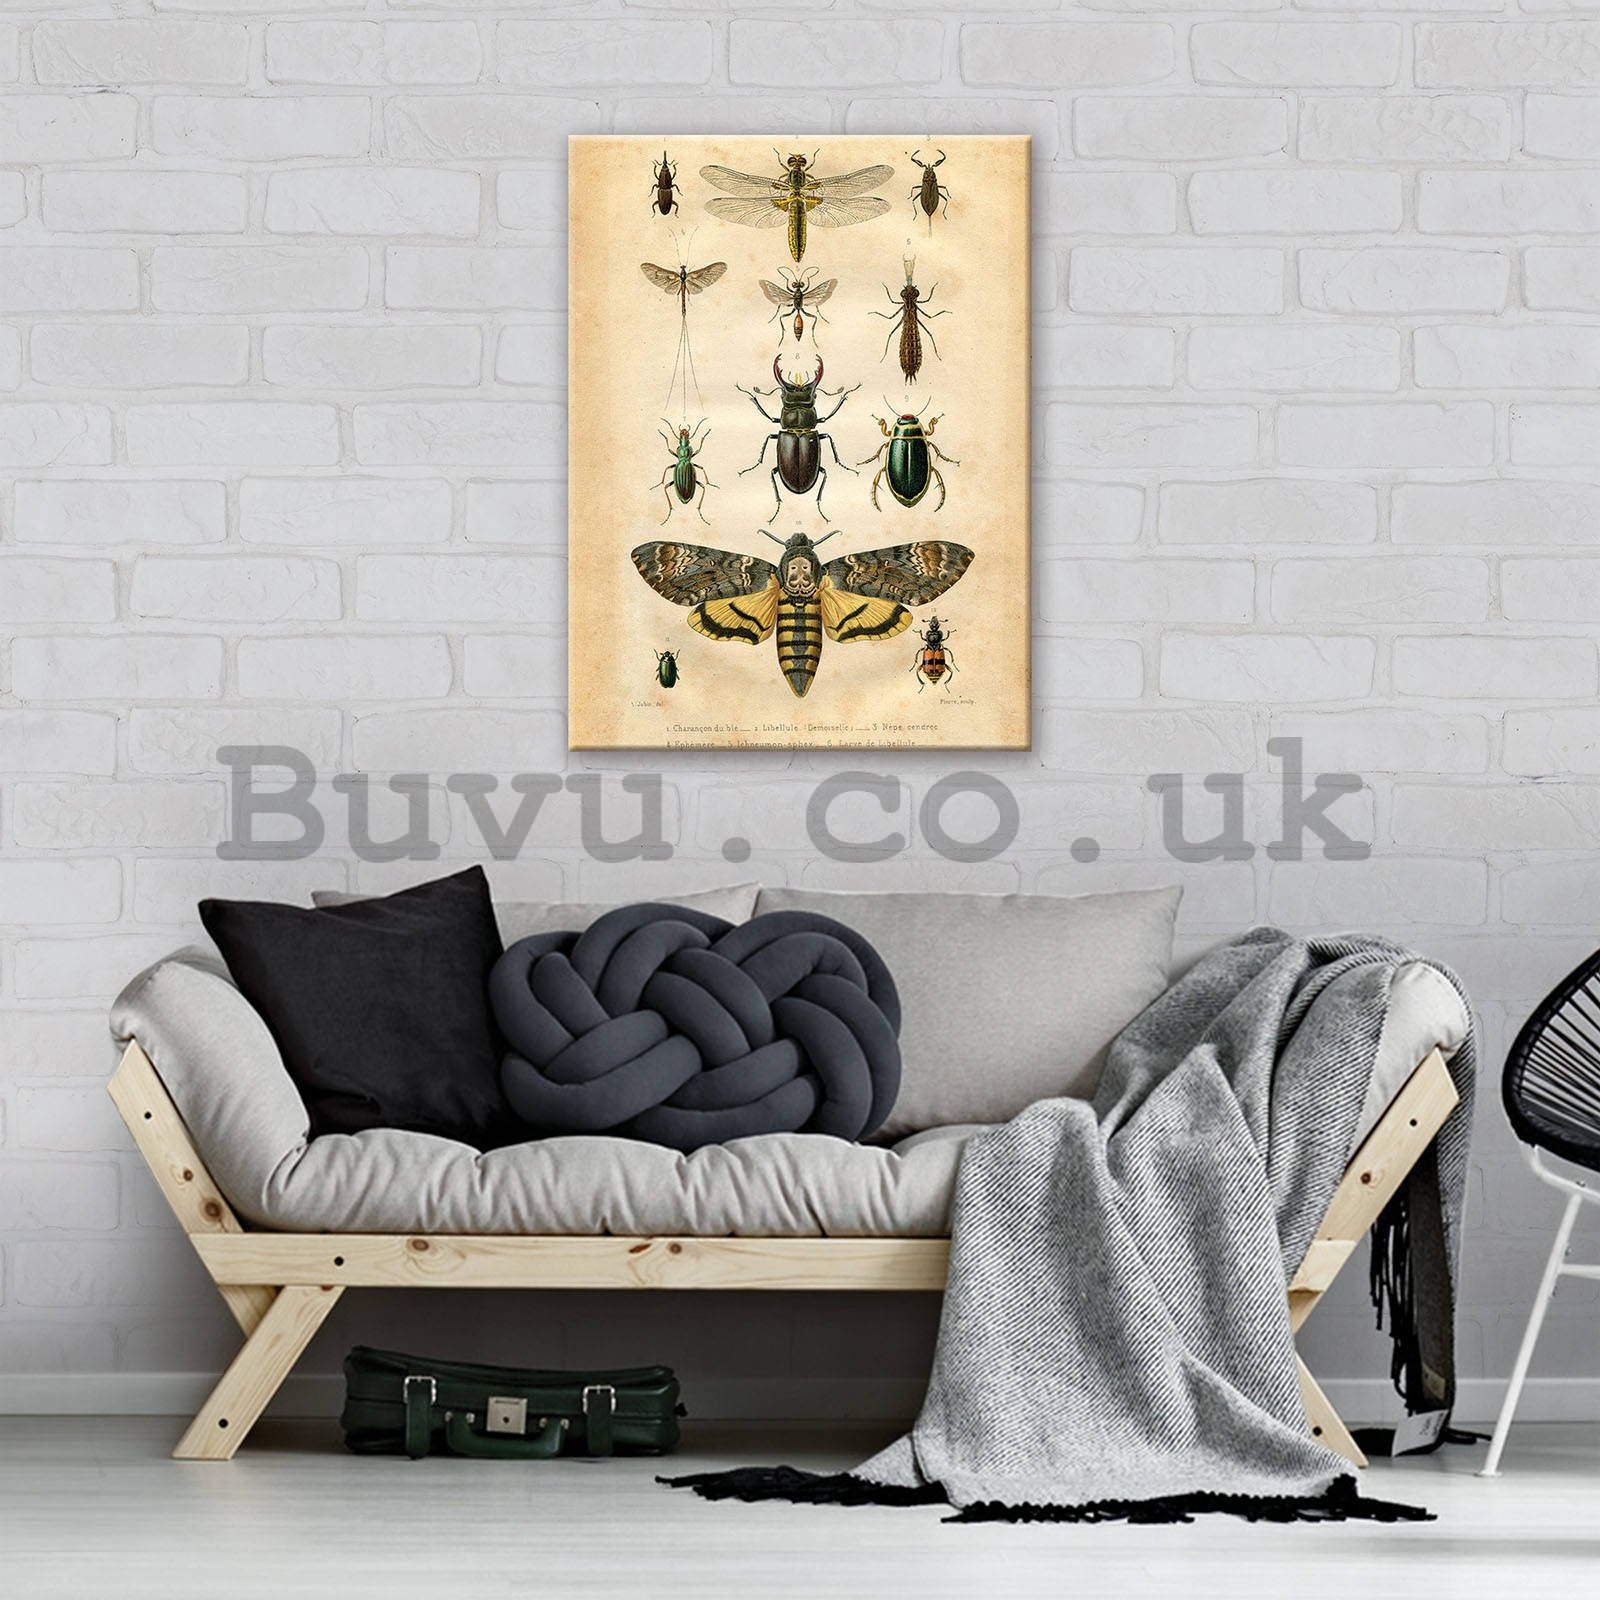 Painting on canvas: Collection of beetles - 60x80 cm